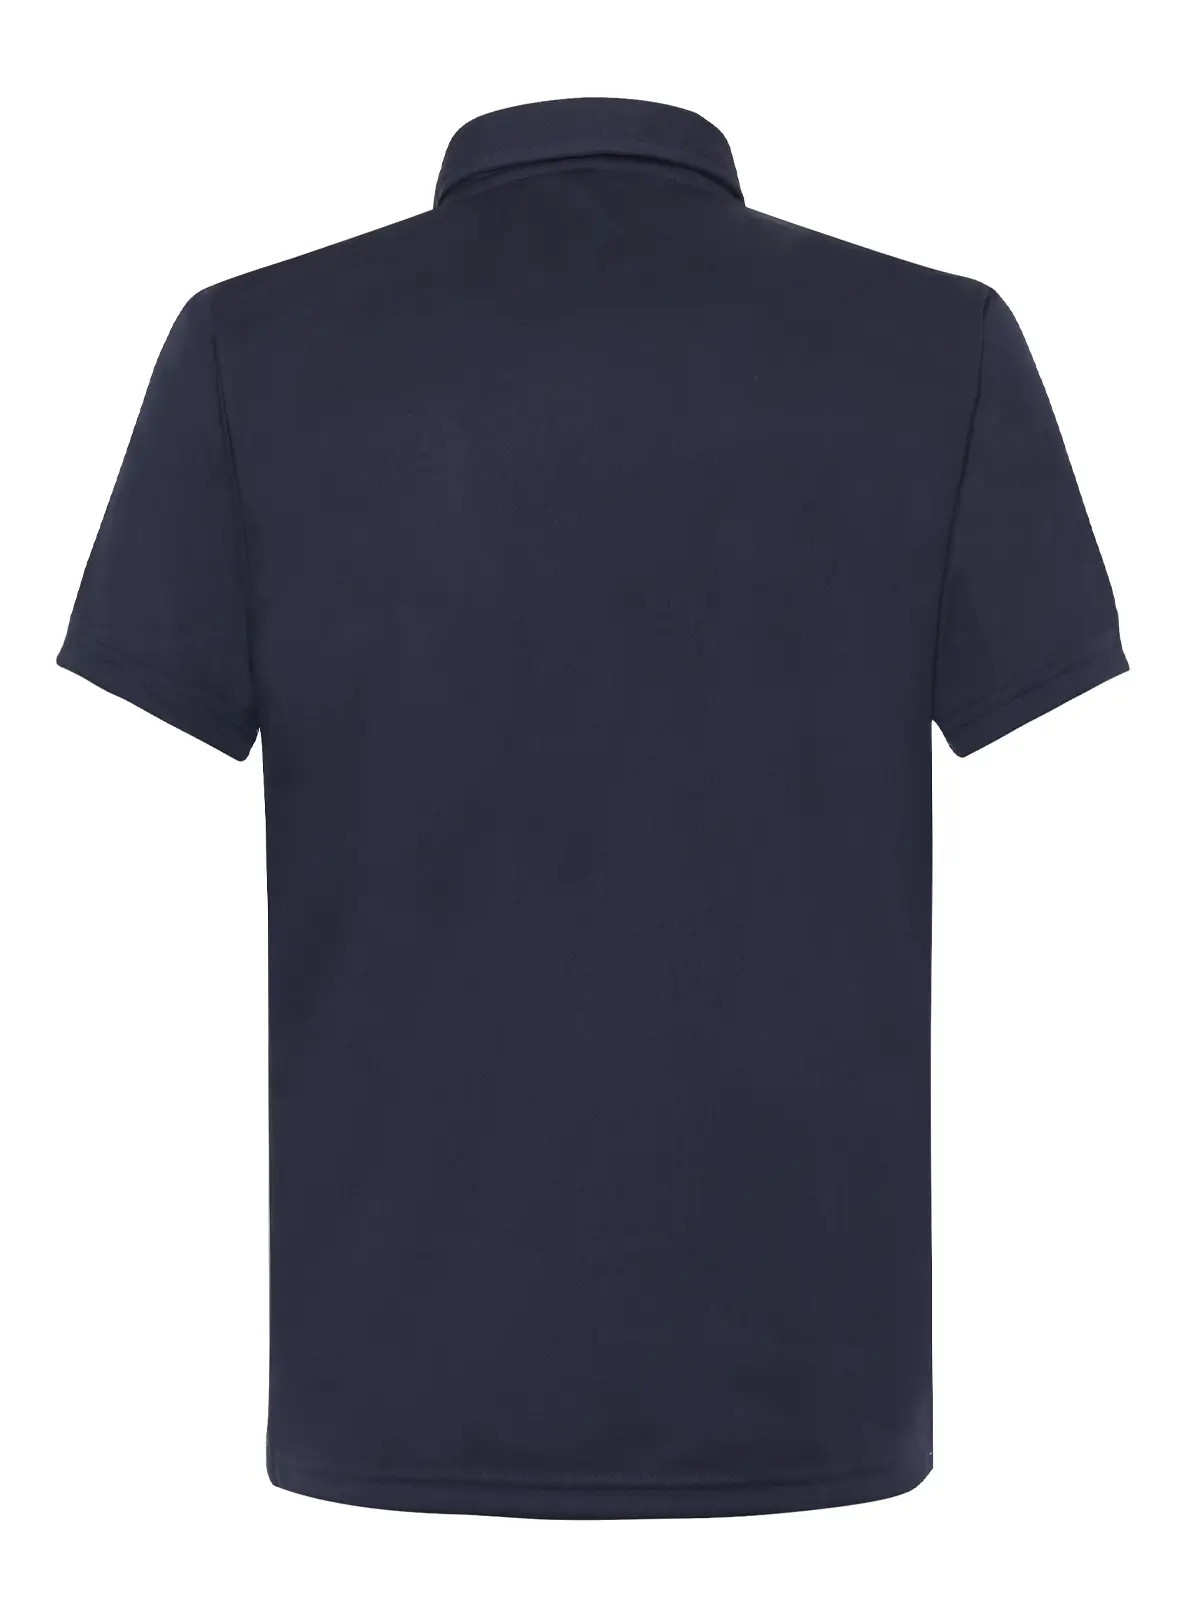 Men's Dry fit P 900 navy blue polo shirt back view